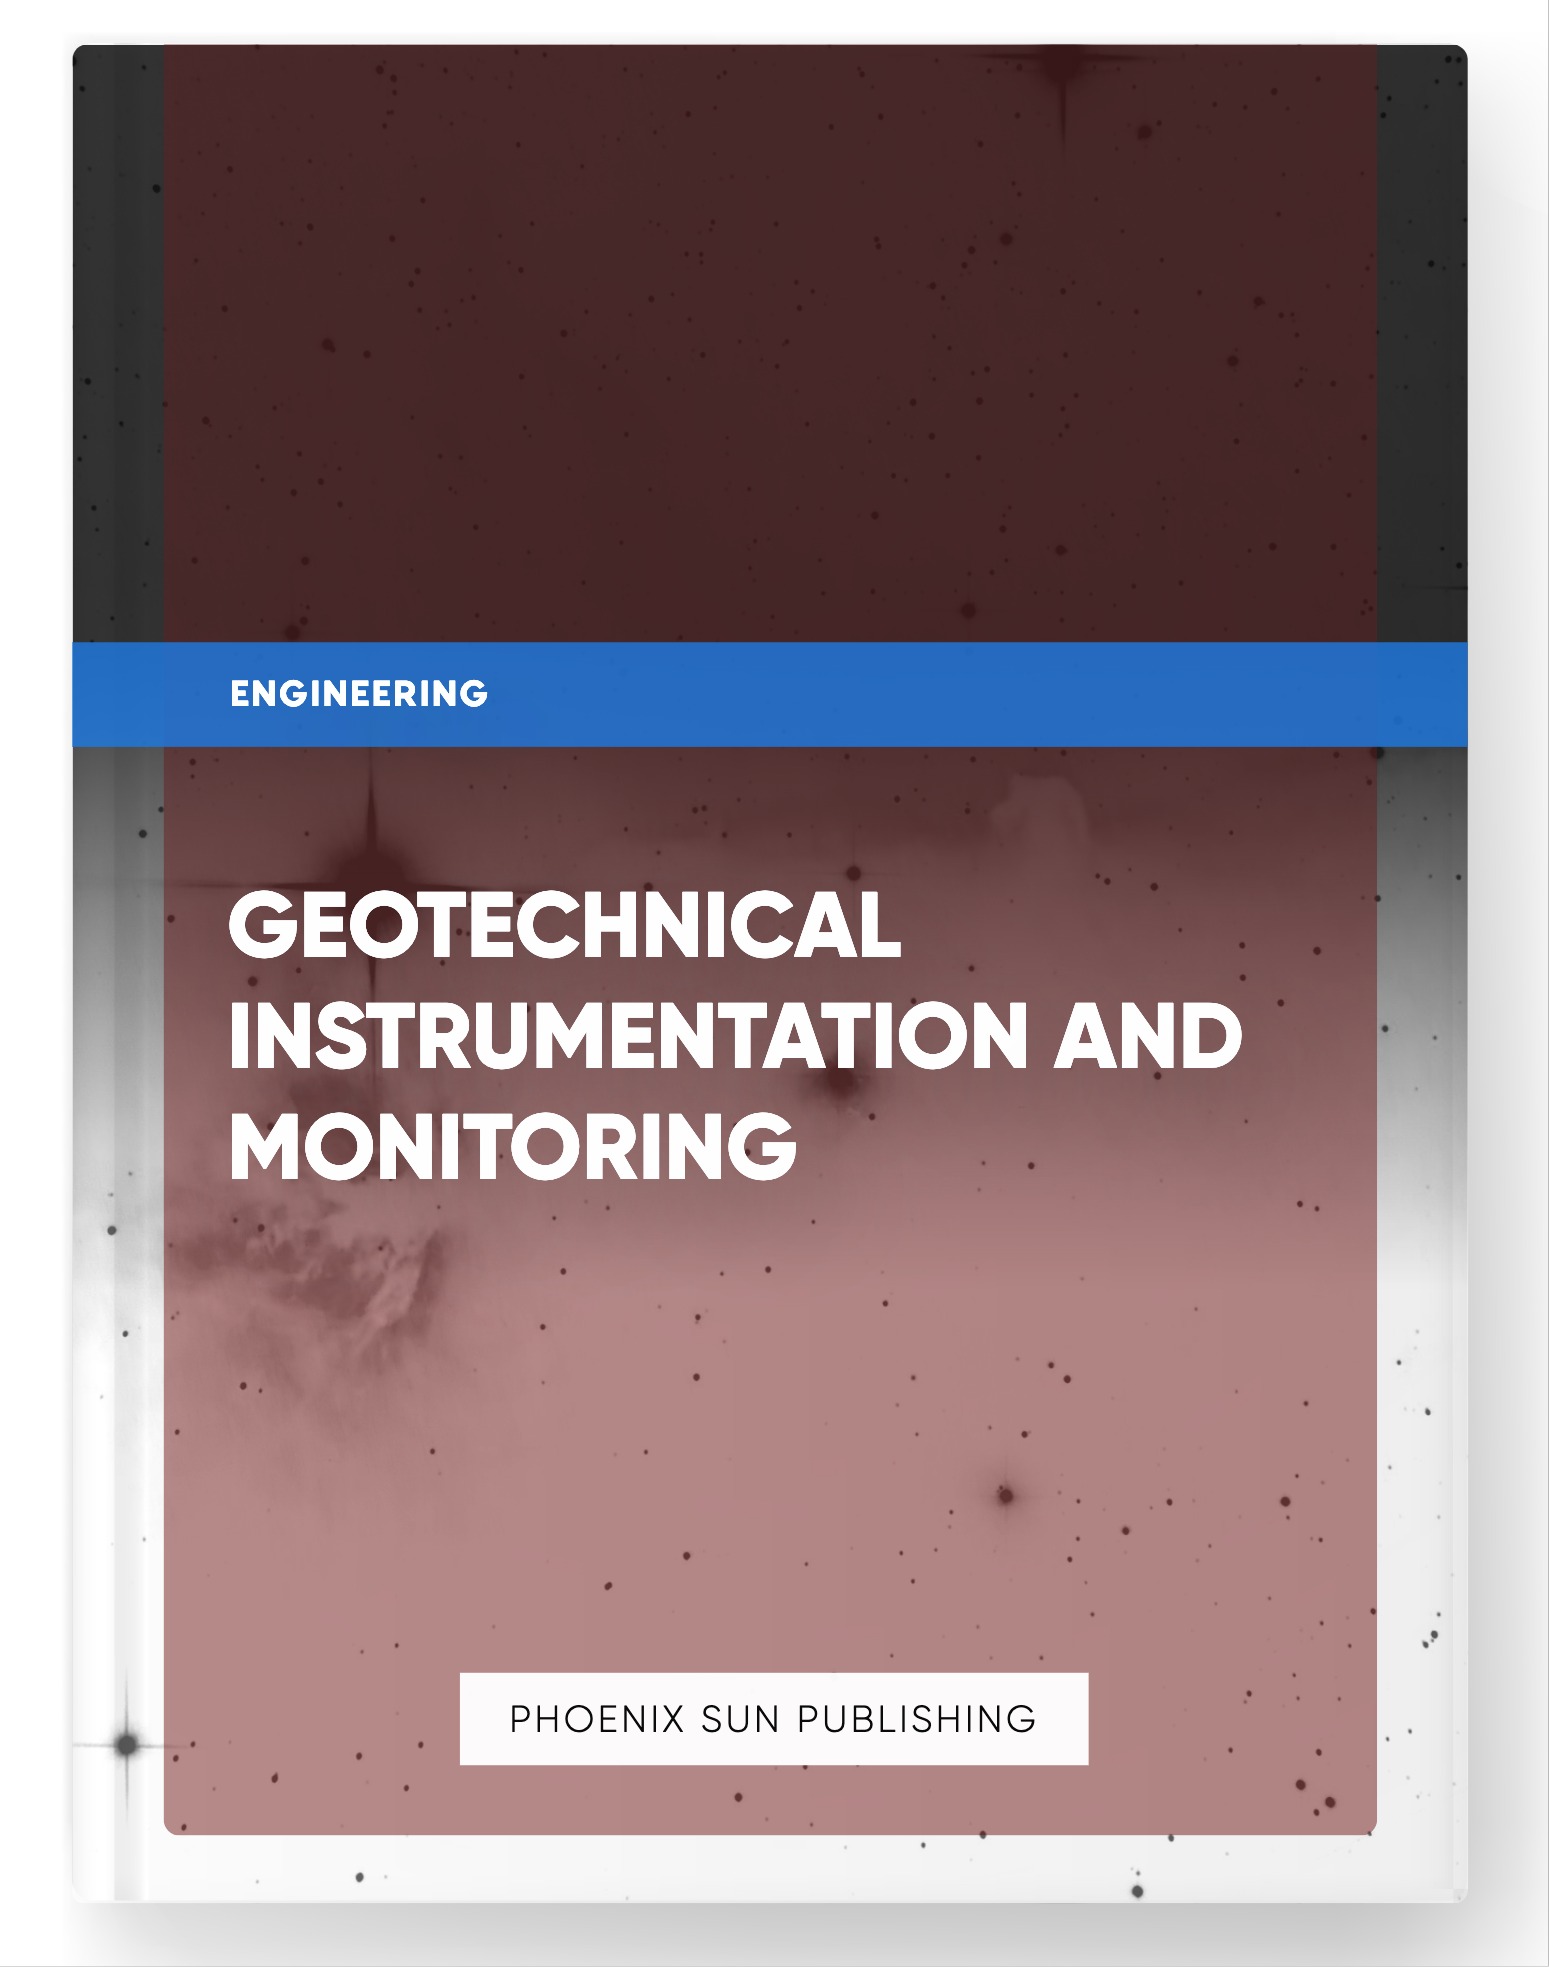 Geotechnical Instrumentation and Monitoring